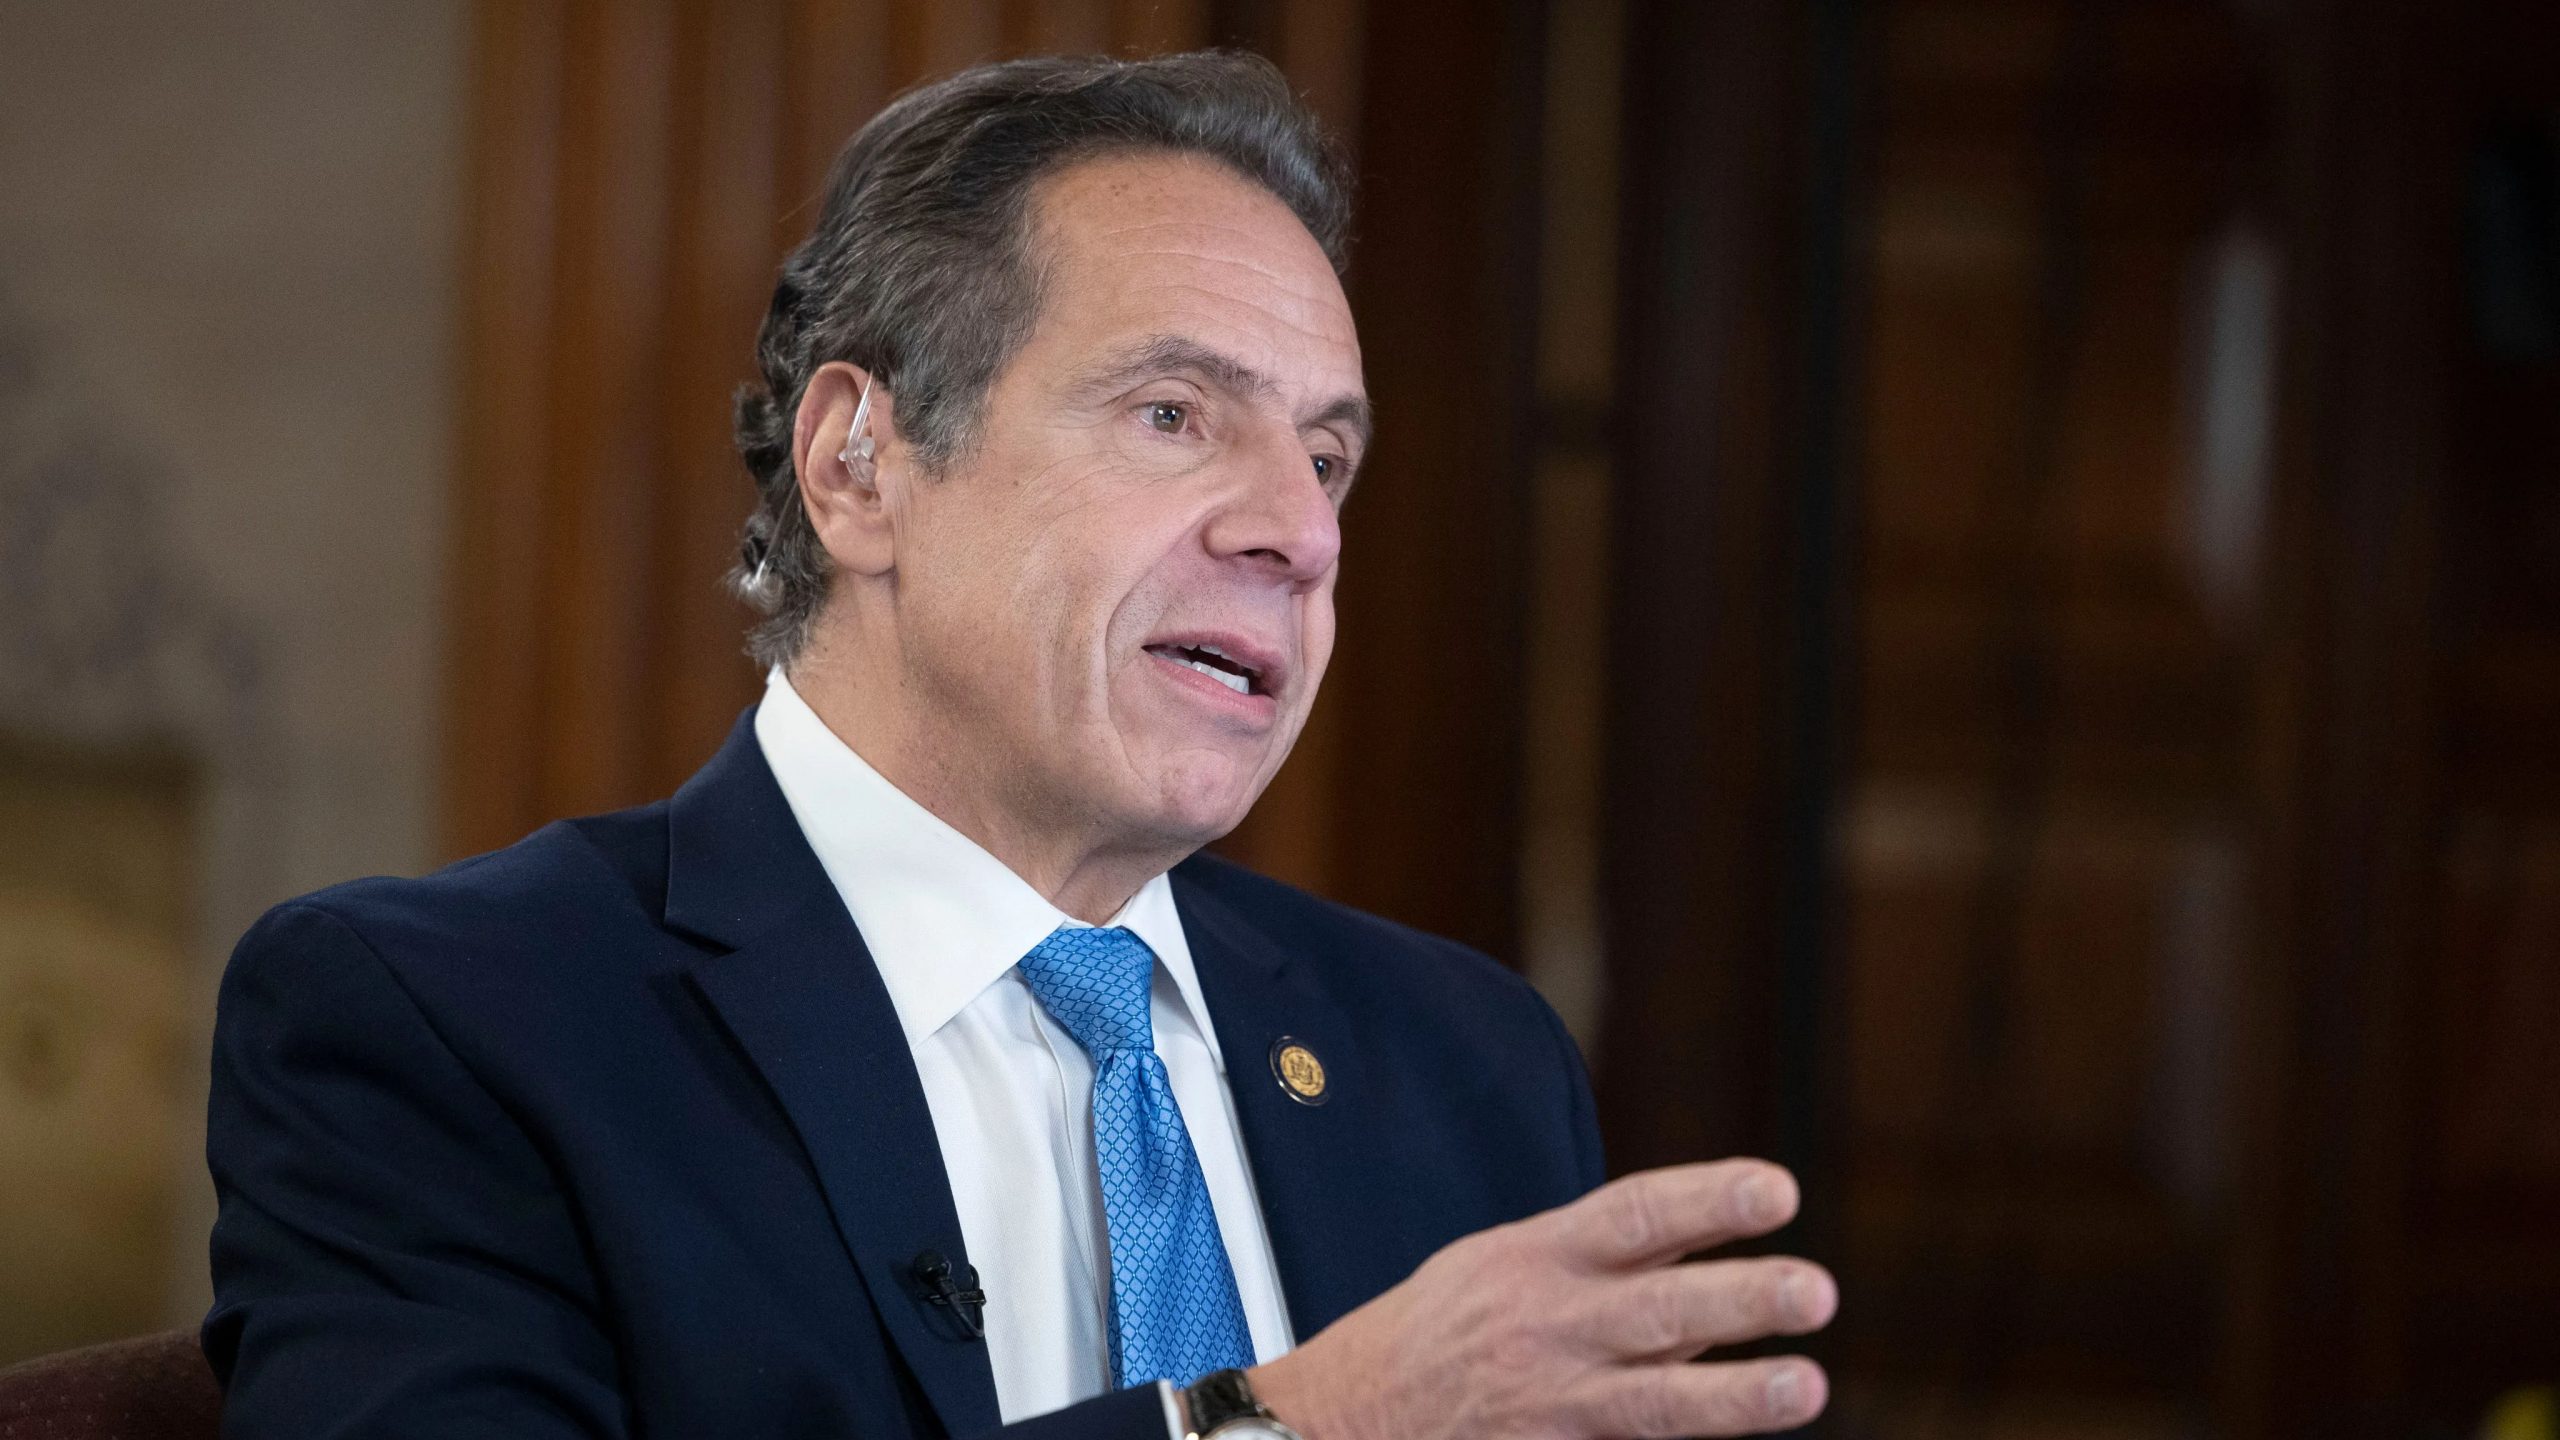 New York Governor Andrew Cuomo accused of making sexual advances by third woman